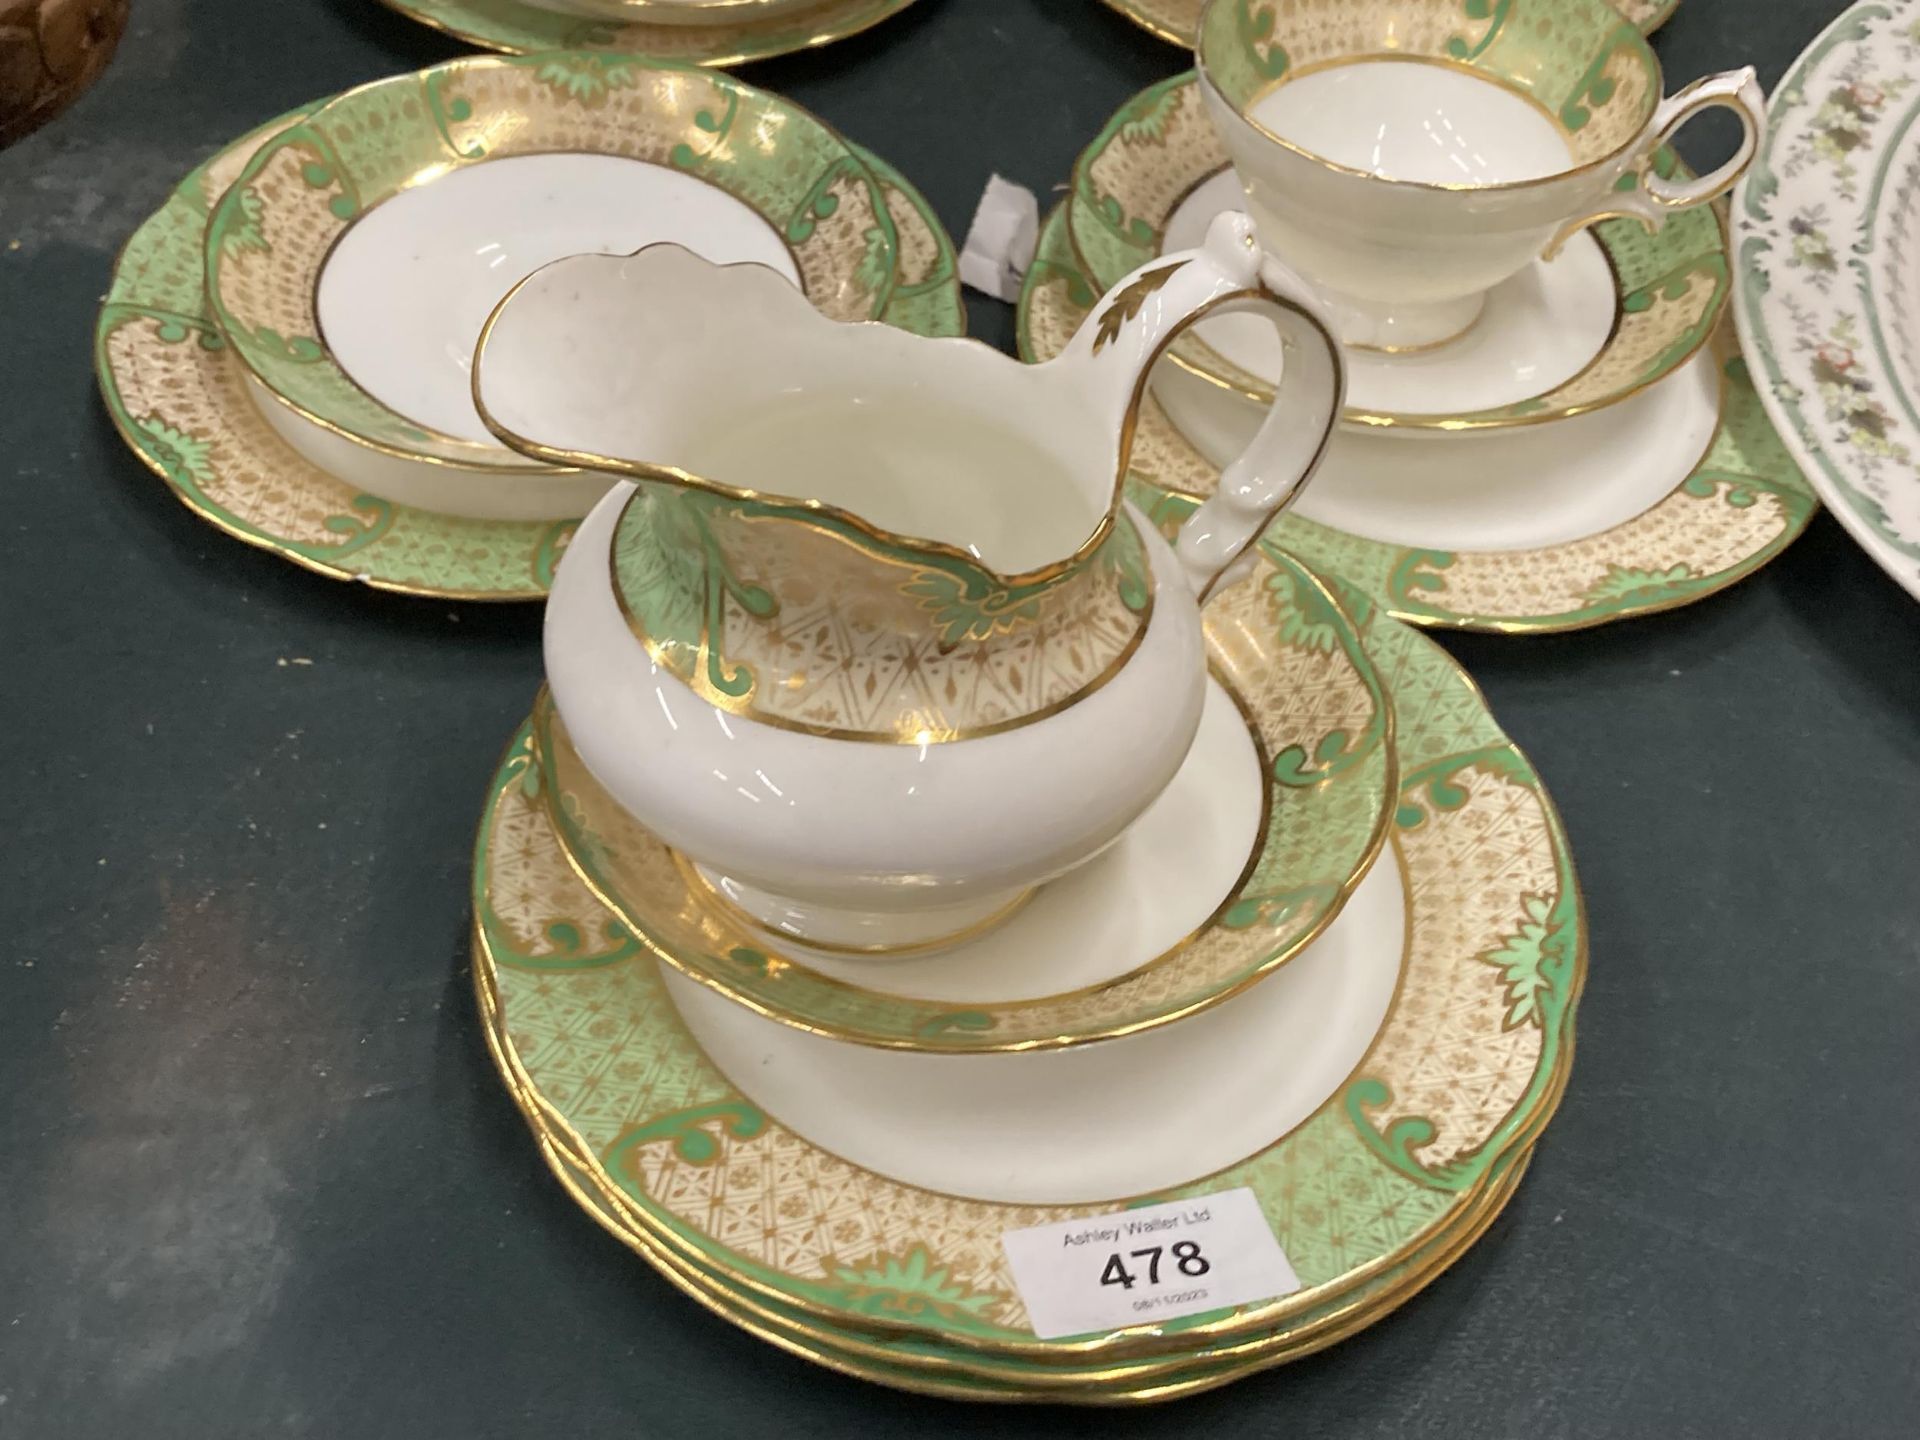 A VINTAGE JENNERS PART CHINA TEASET TO INCLUDE A CREAM JUG, CUPS, SAUCERS AND SIDE PLATES - Image 2 of 4